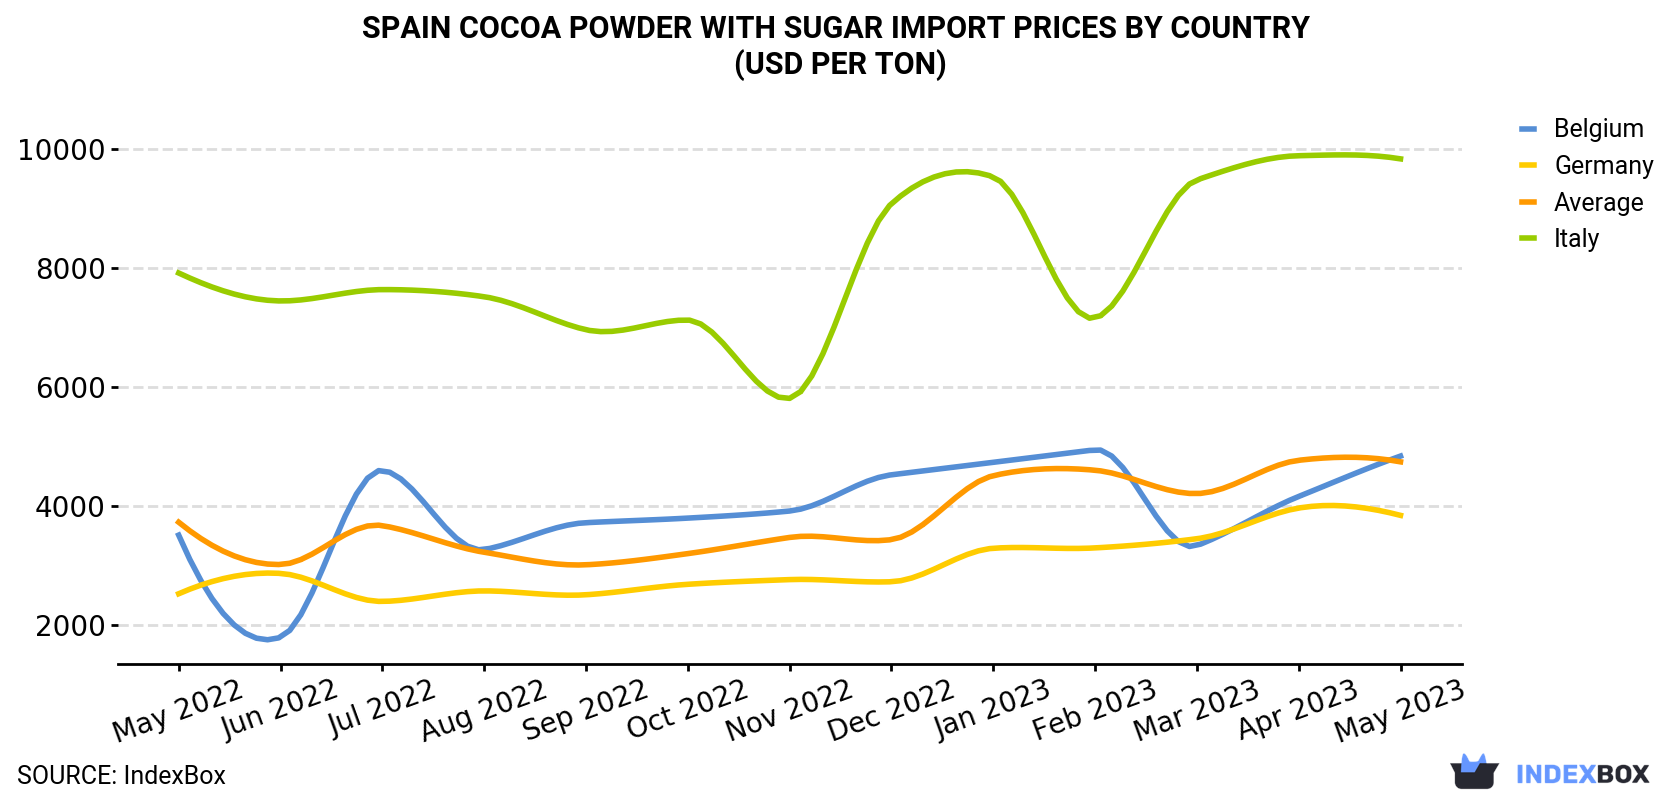 Spain Cocoa Powder With Sugar Import Prices By Country (USD Per Ton)